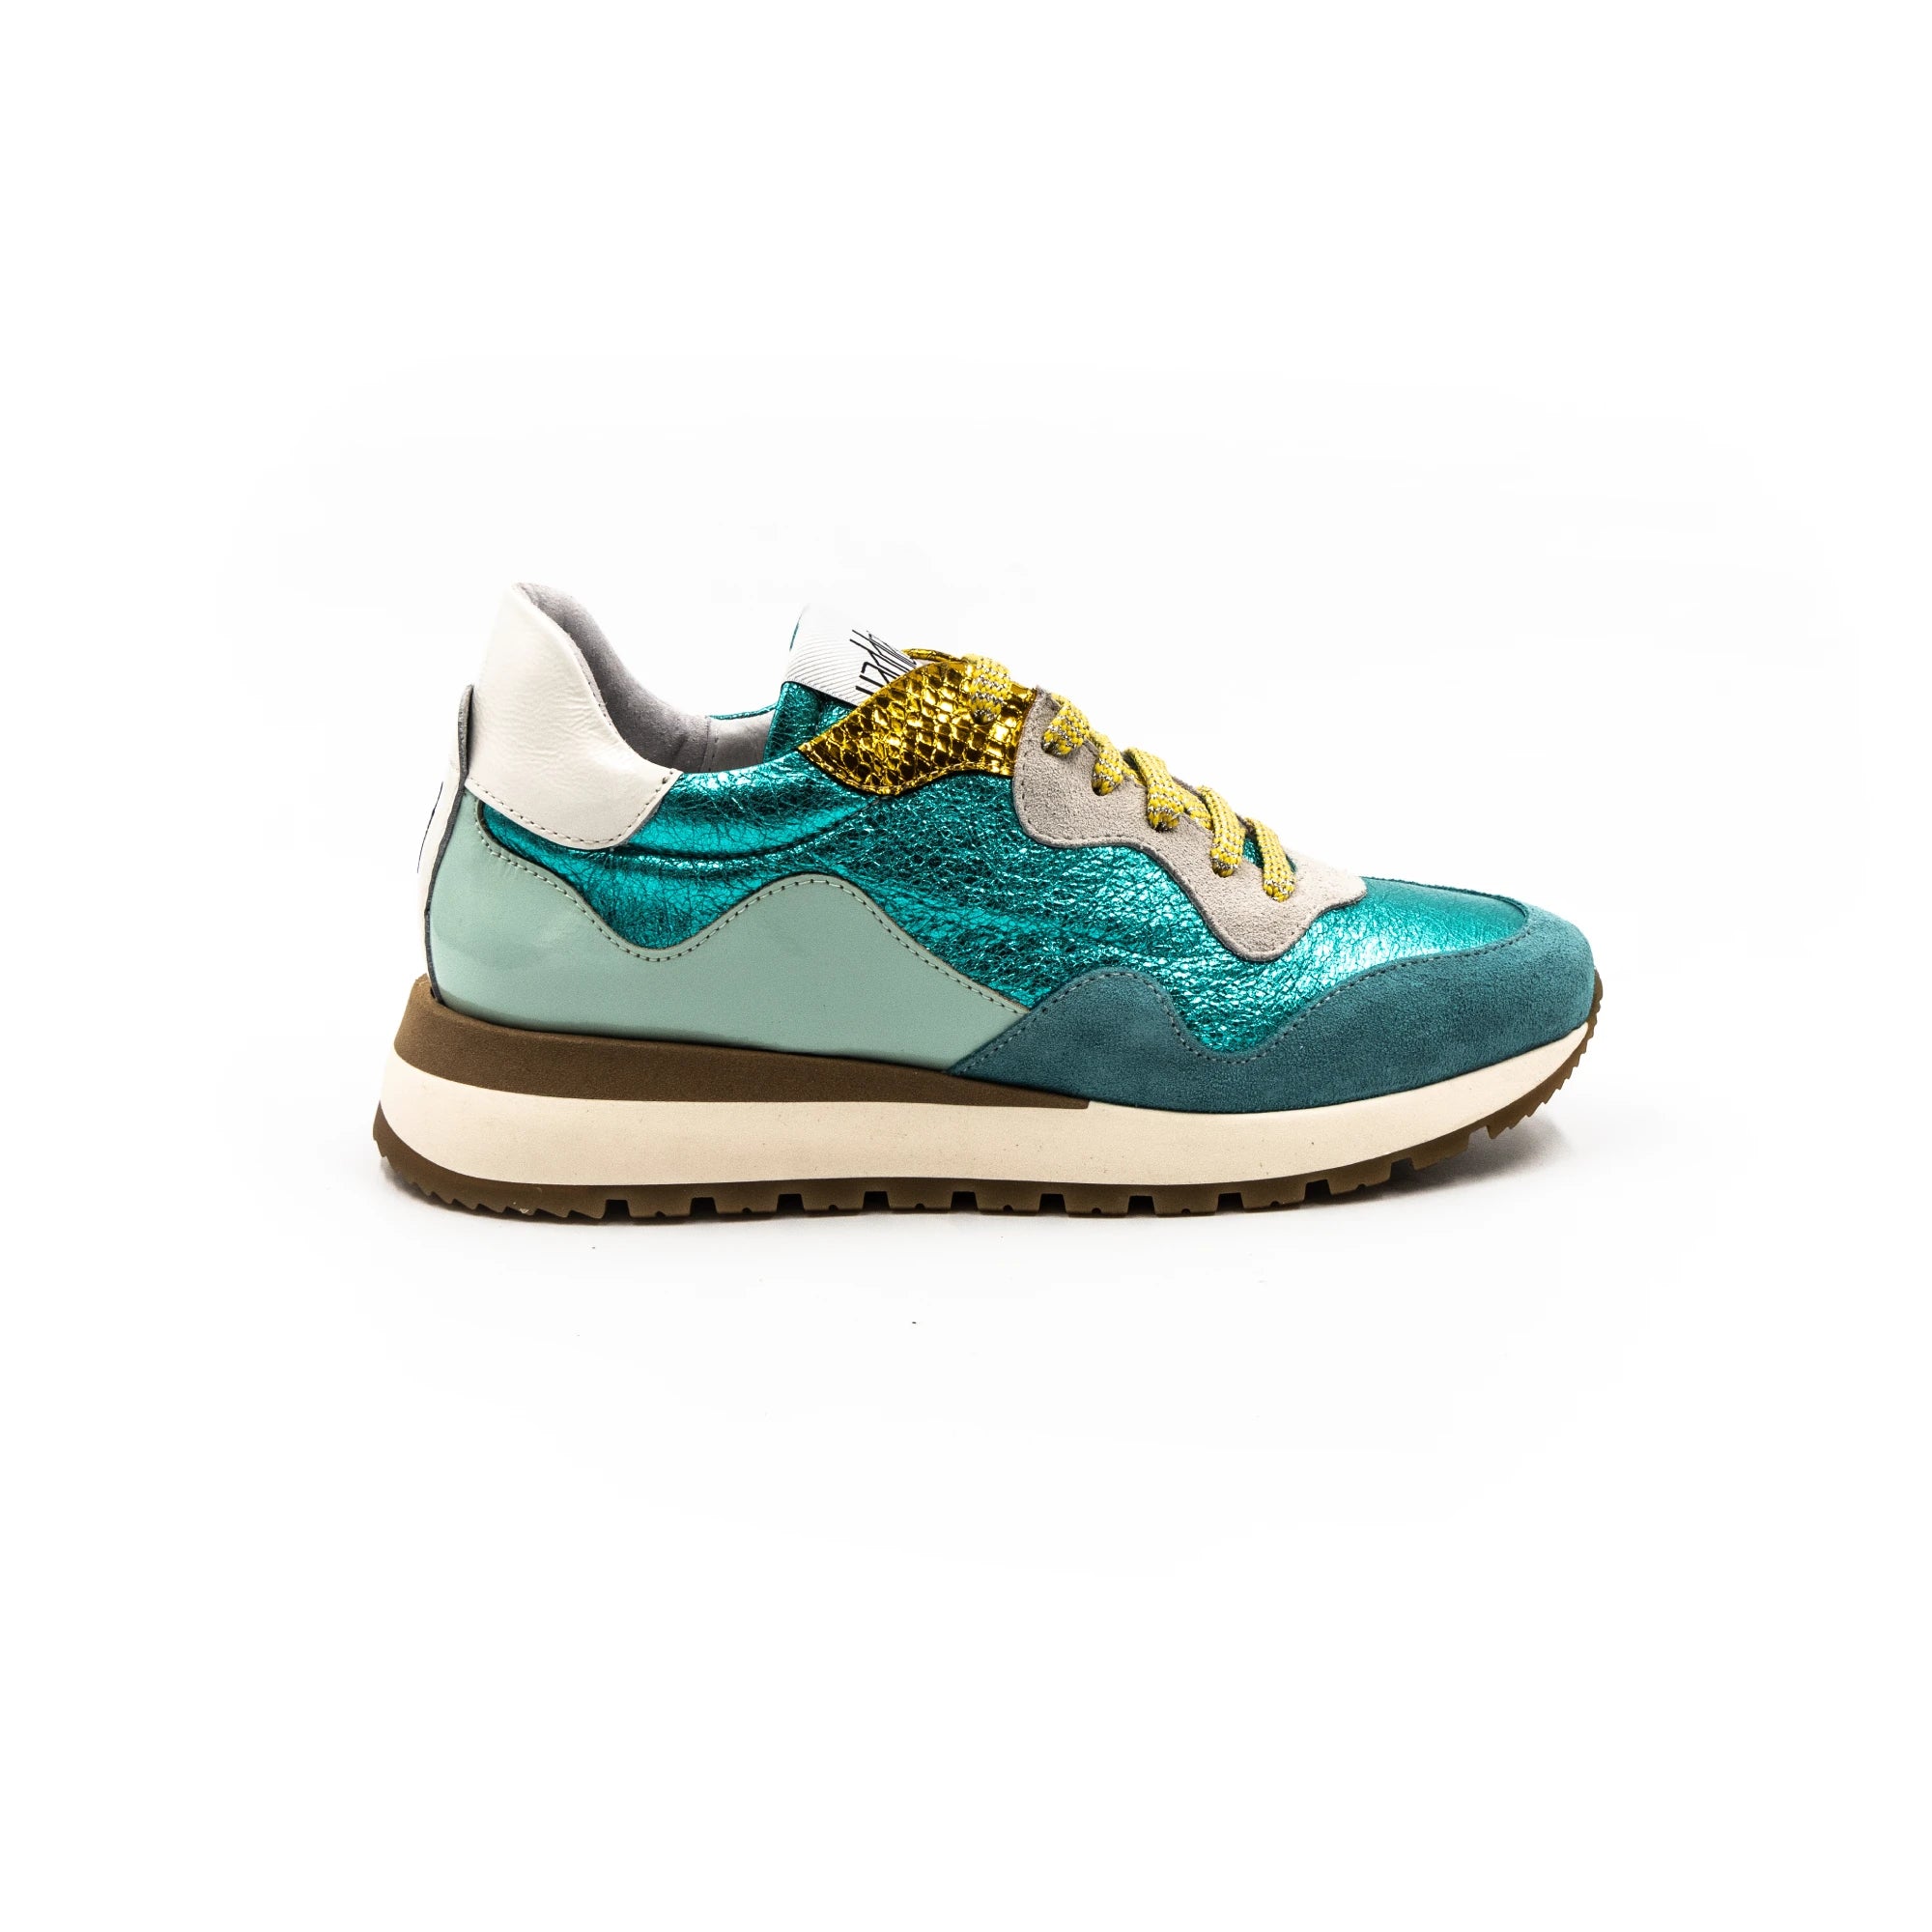 Turquoise, perforated sneakers.